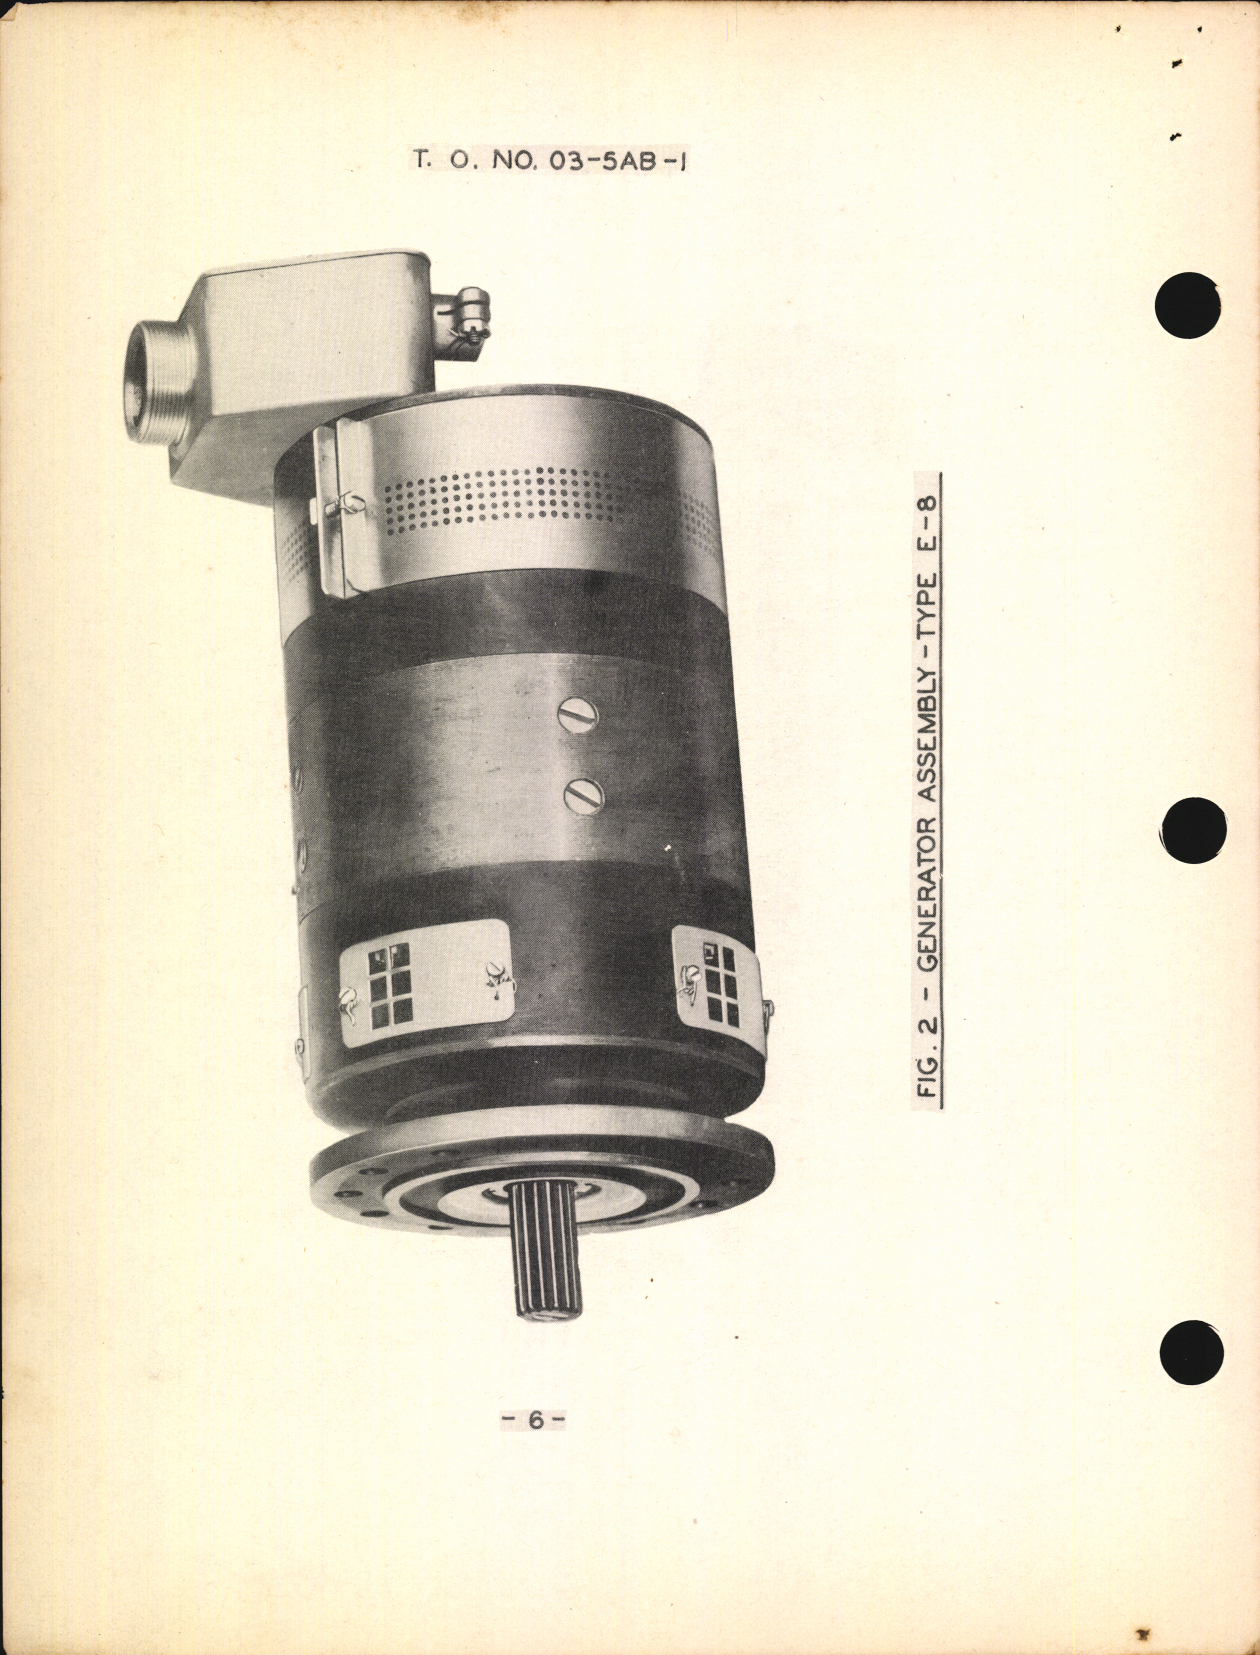 Sample page 8 from AirCorps Library document: Handbook of Instructions with Parts Catalog for Aircraft Engine Generators and Control Box Types E5, E8, and D4